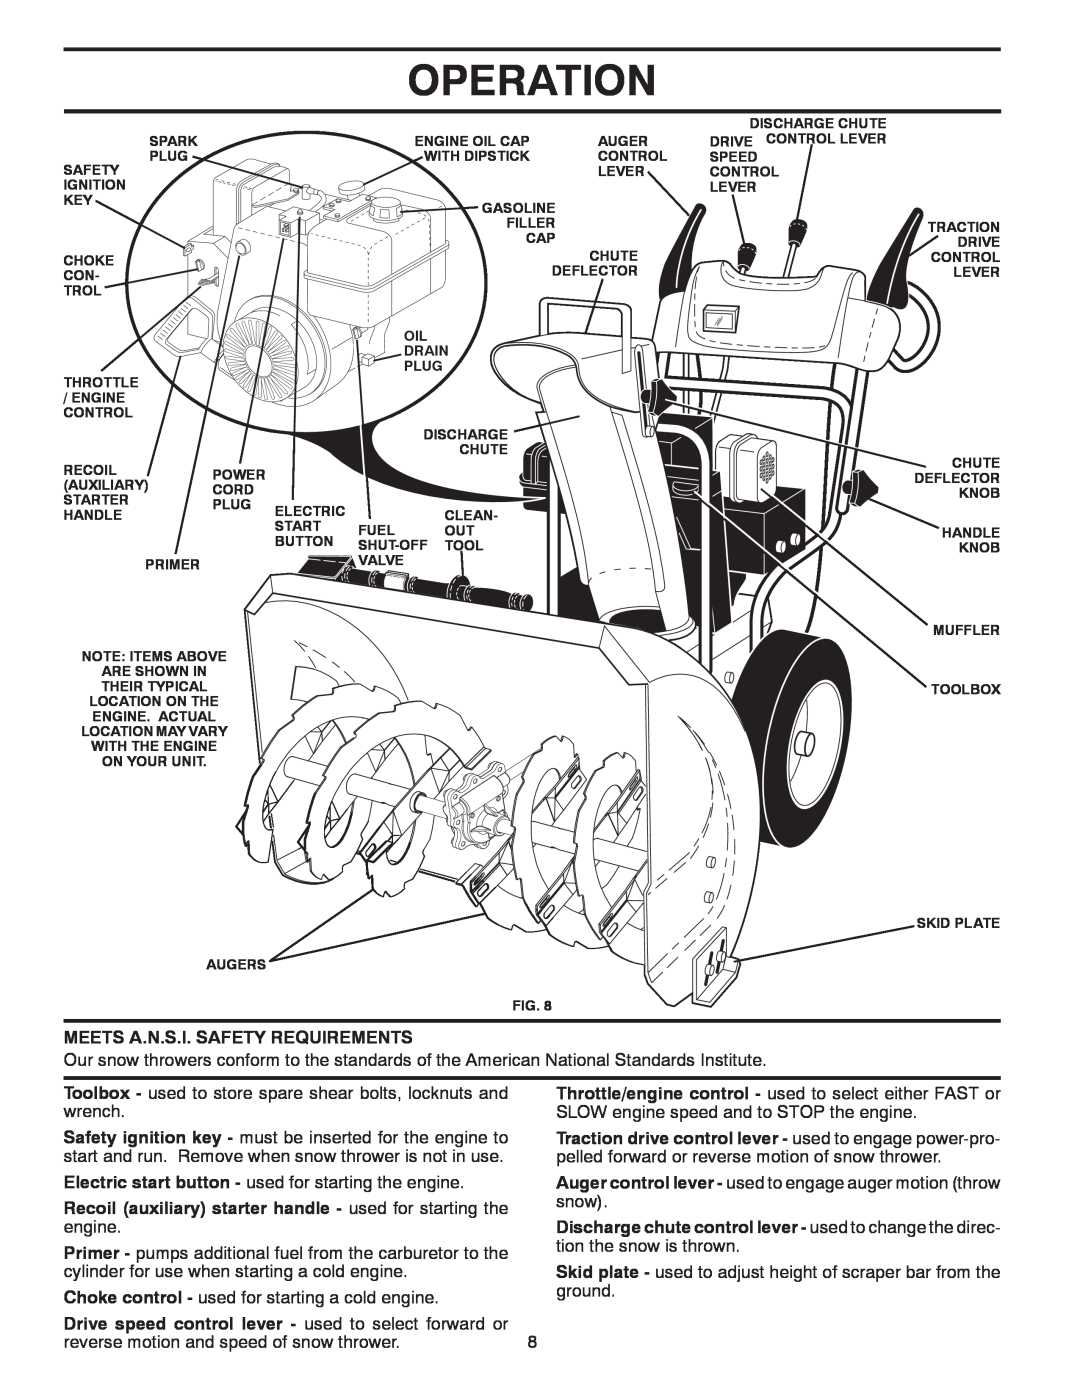 Husqvarna 927SB, 96193004400 owner manual Operation, Meets A.N.S.I. Safety Requirements 